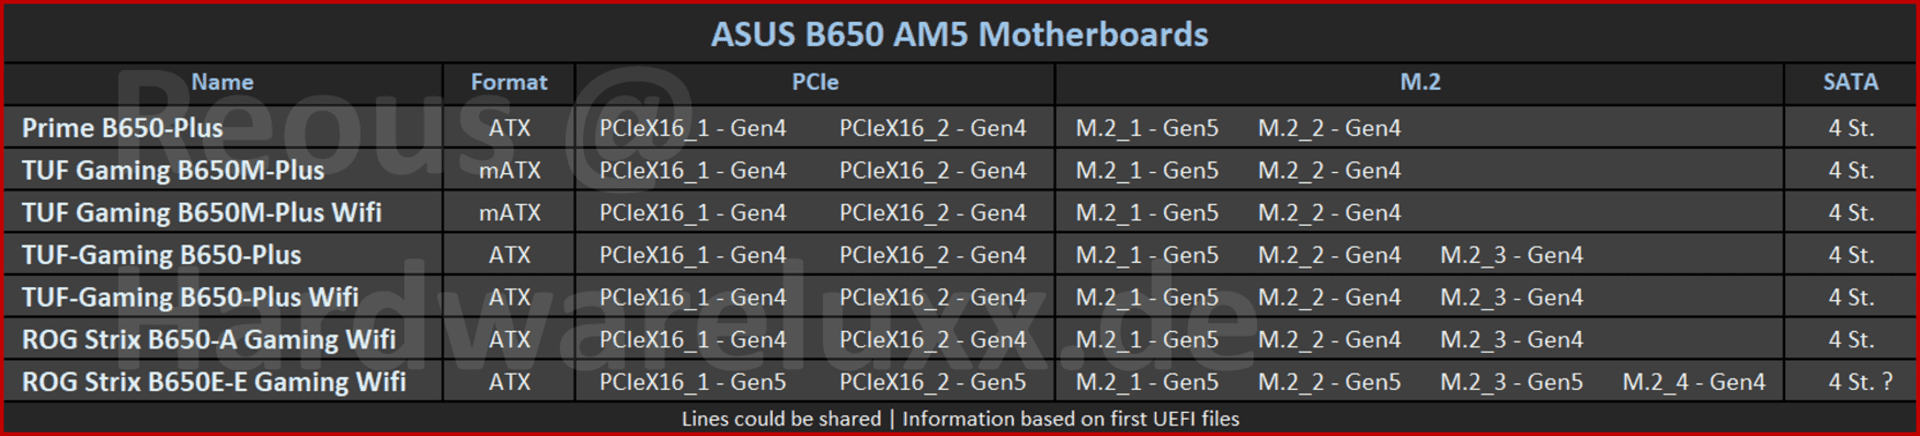 asus-am5-b650-pcie_1920px.png